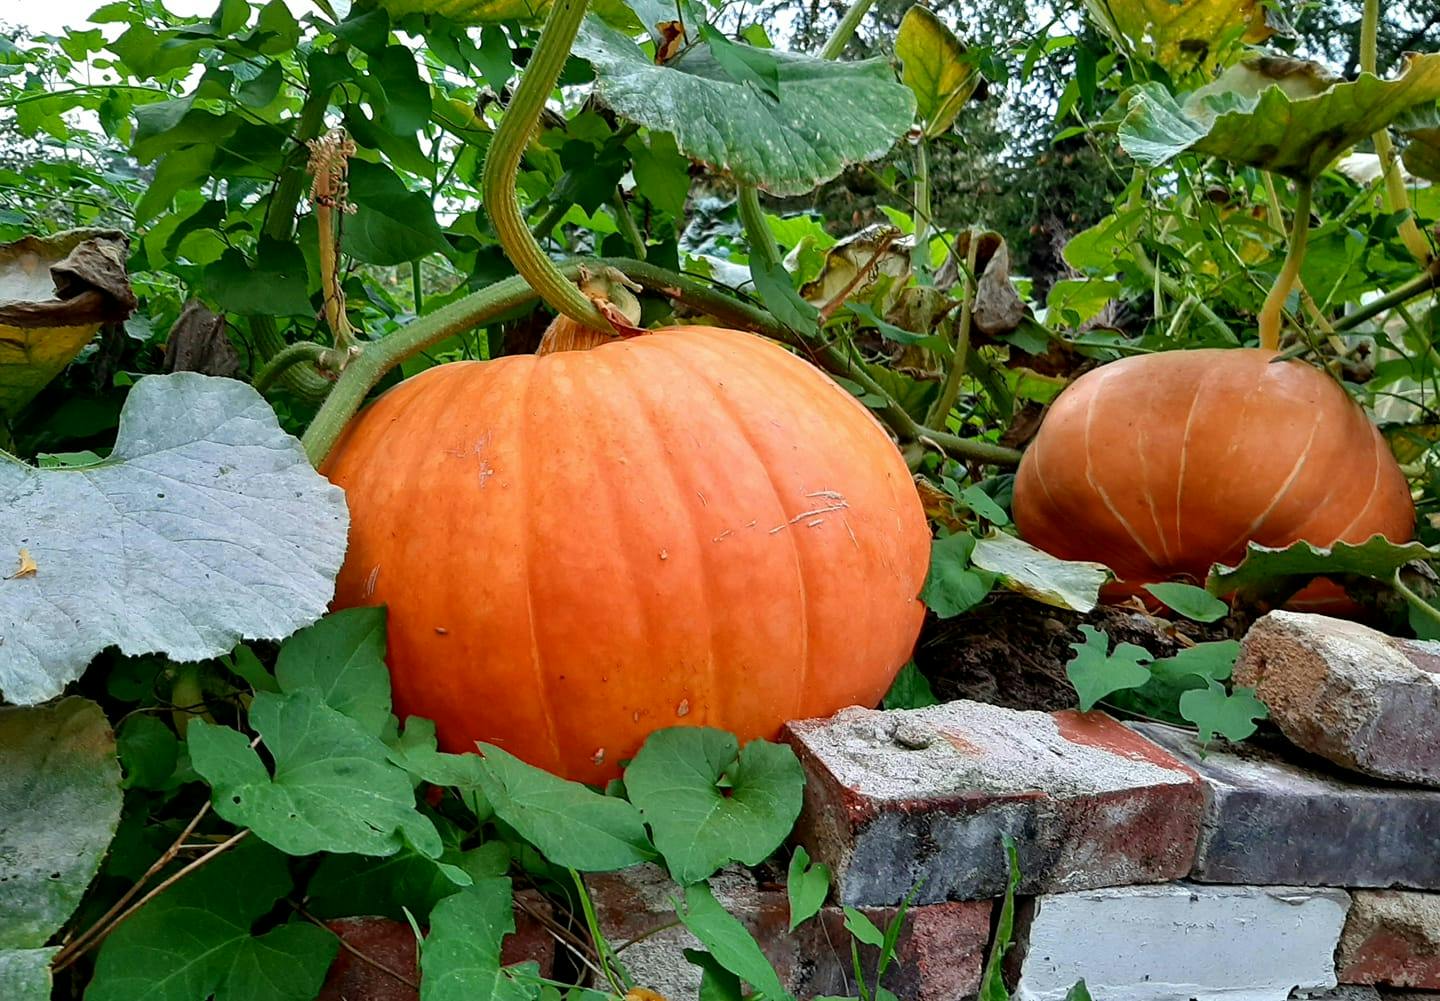 Two large pumpkins still on their vines in Christina Myers's backyard garden.